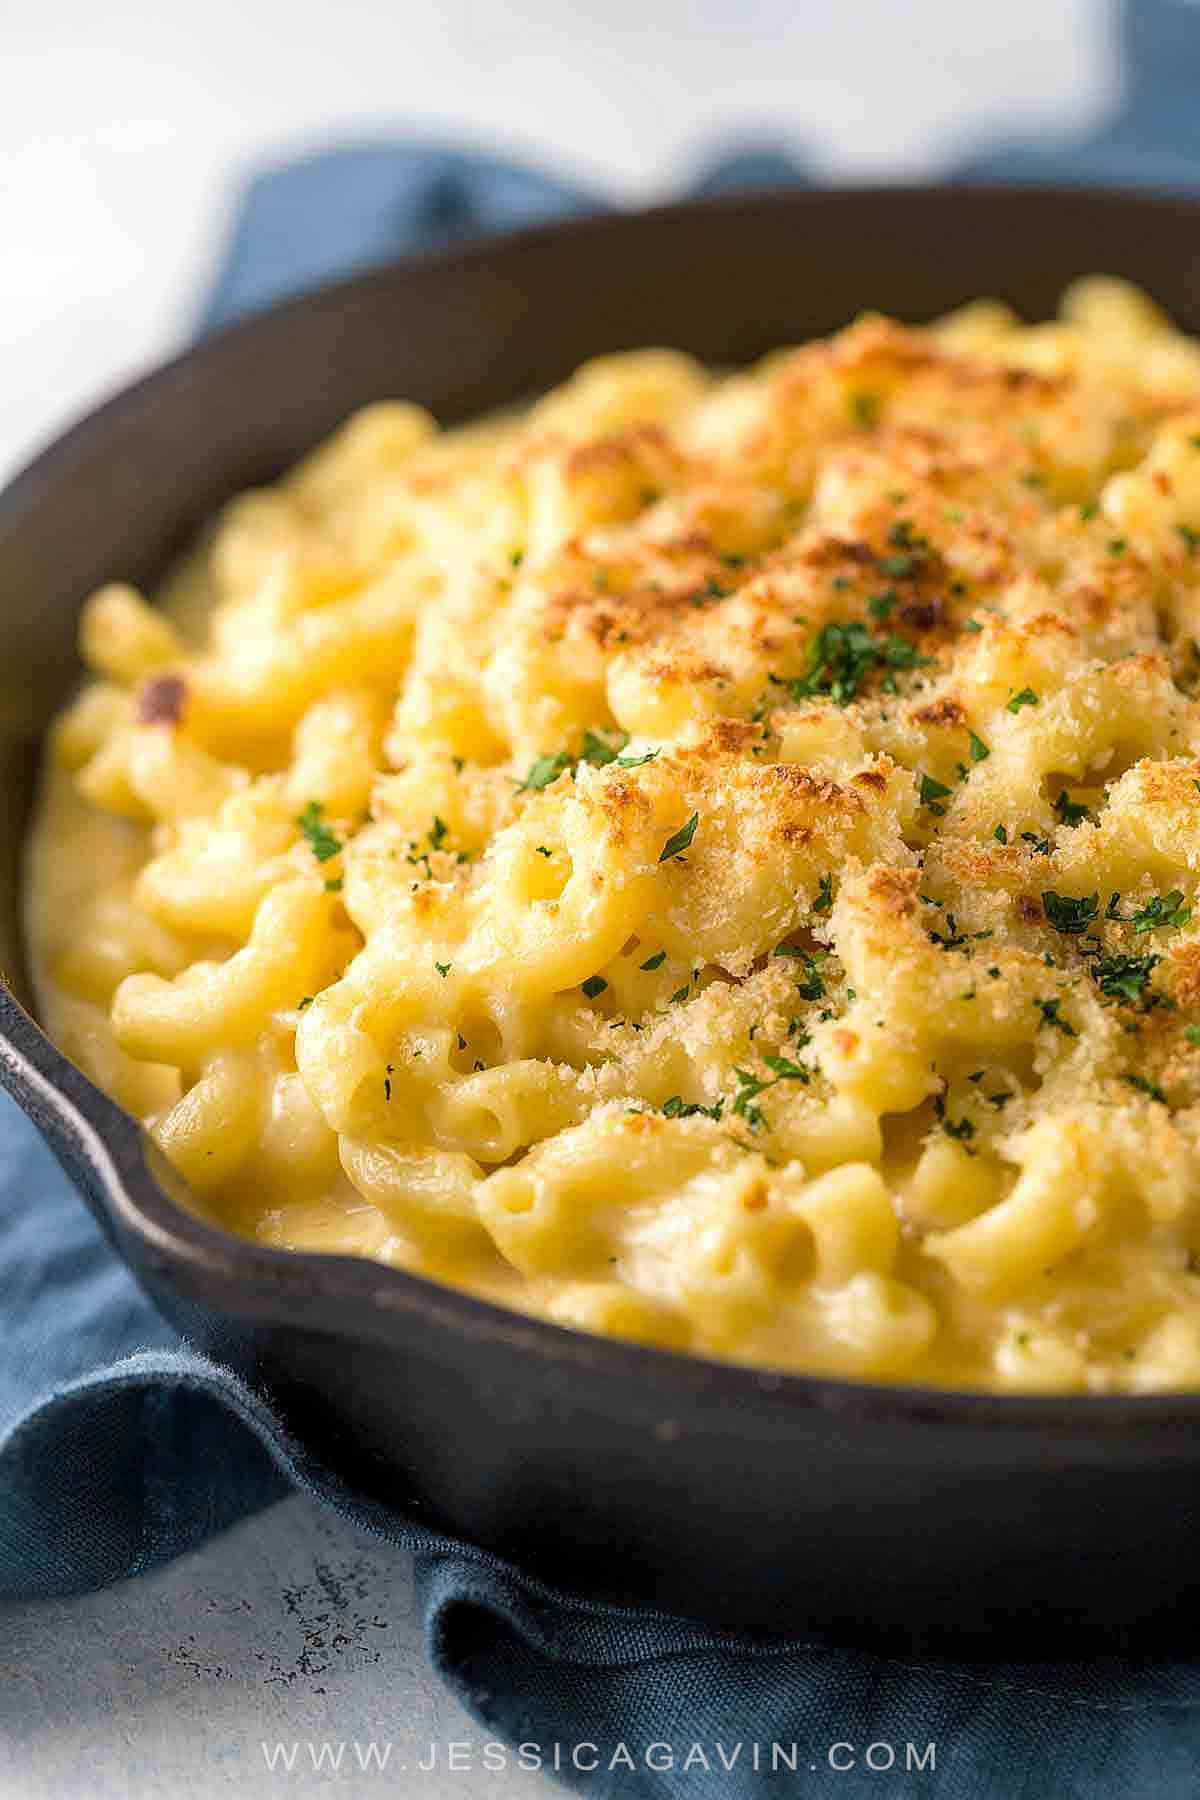 Baked Macaroni And Cheese With Ham And Bread Crumbs
 Baked Macaroni and Cheese with Bread Crumb Topping